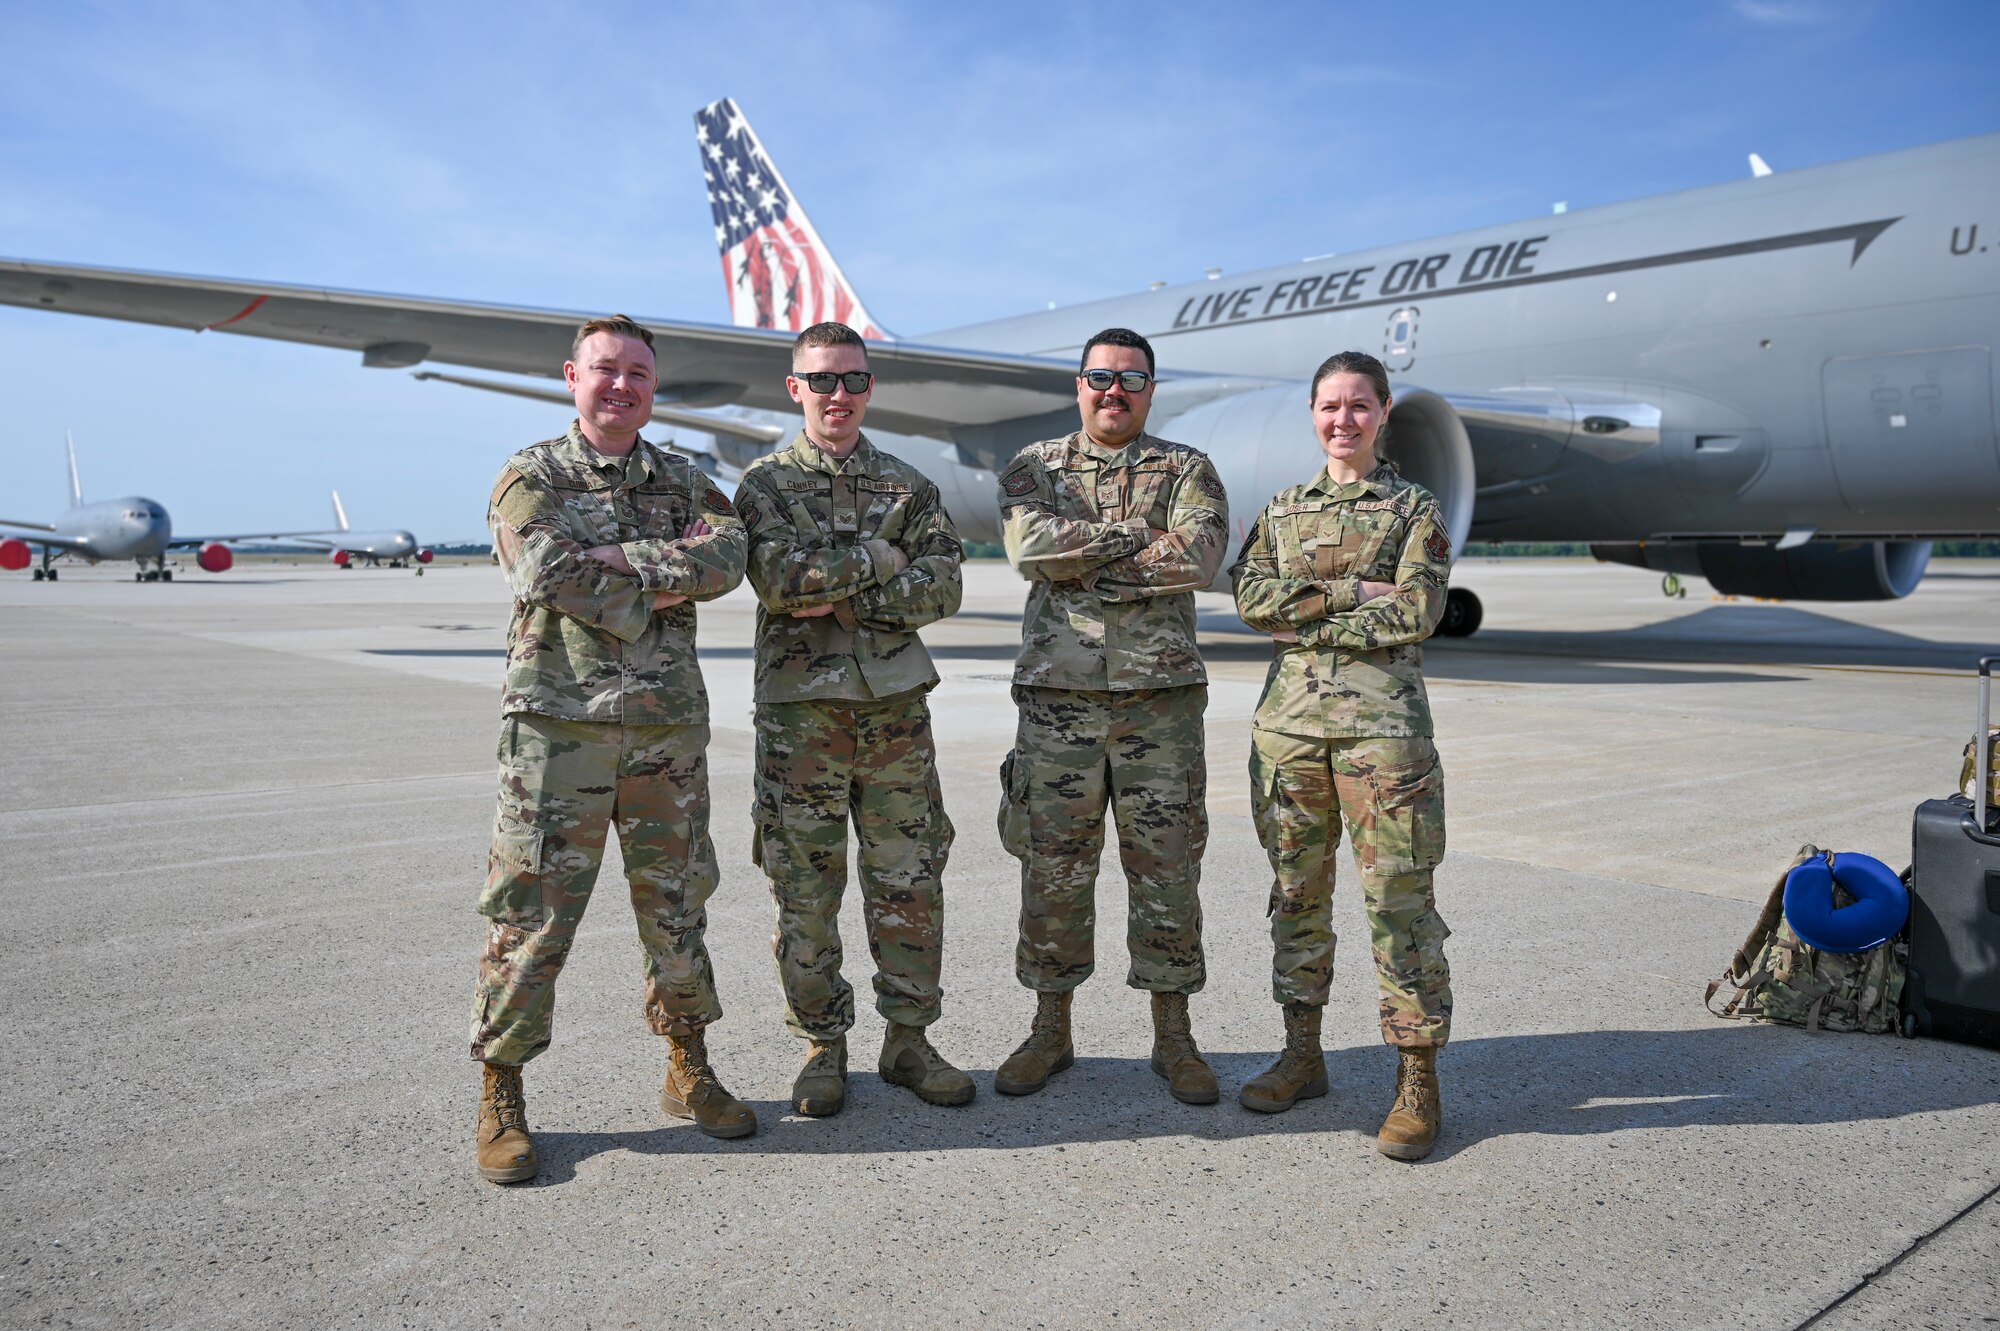 Tech. Sgt. Jason Cunha, Staff Sgt. Kevin Canney, Staff Sgt. Cory Lewis and Airman 1st Class Rebekka Bloser, maintainers with the 157th Maintenance Group, landed July 1, 2022 at Pease Air National Guard Base, New Hampshire.